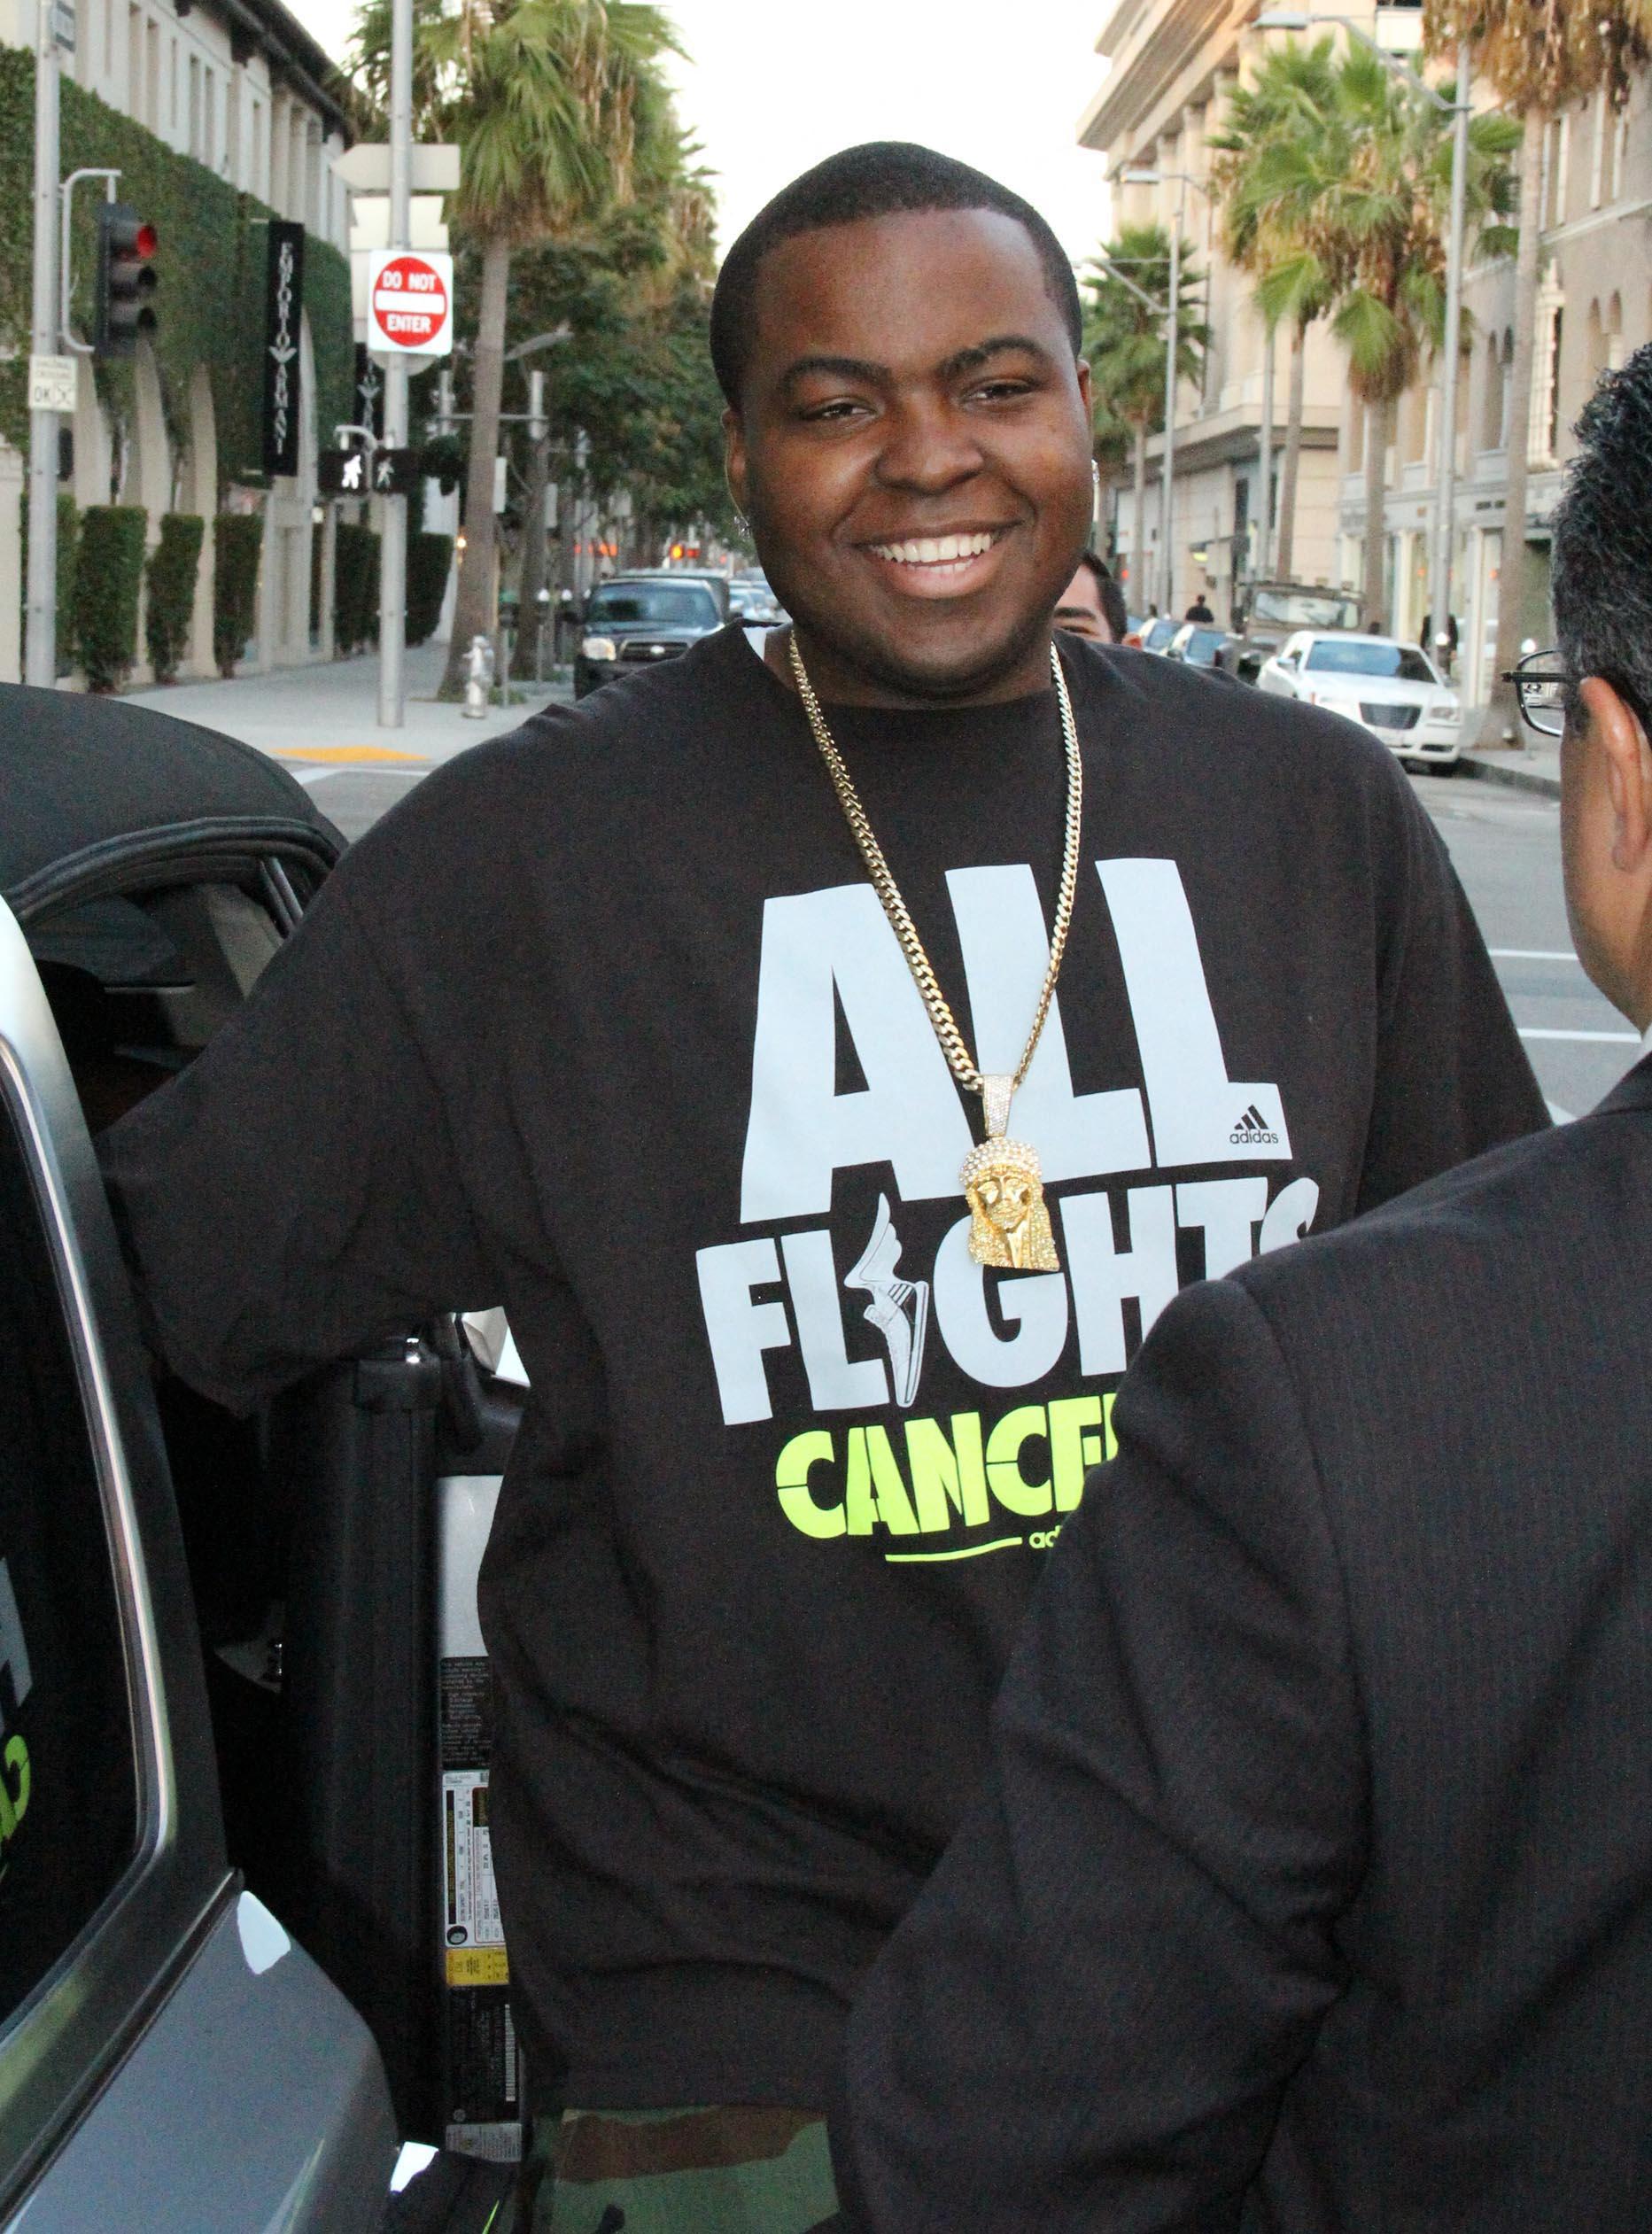 SEAN KINGSTON HEADING TO HIS CAR IN BEVERLY HILLS